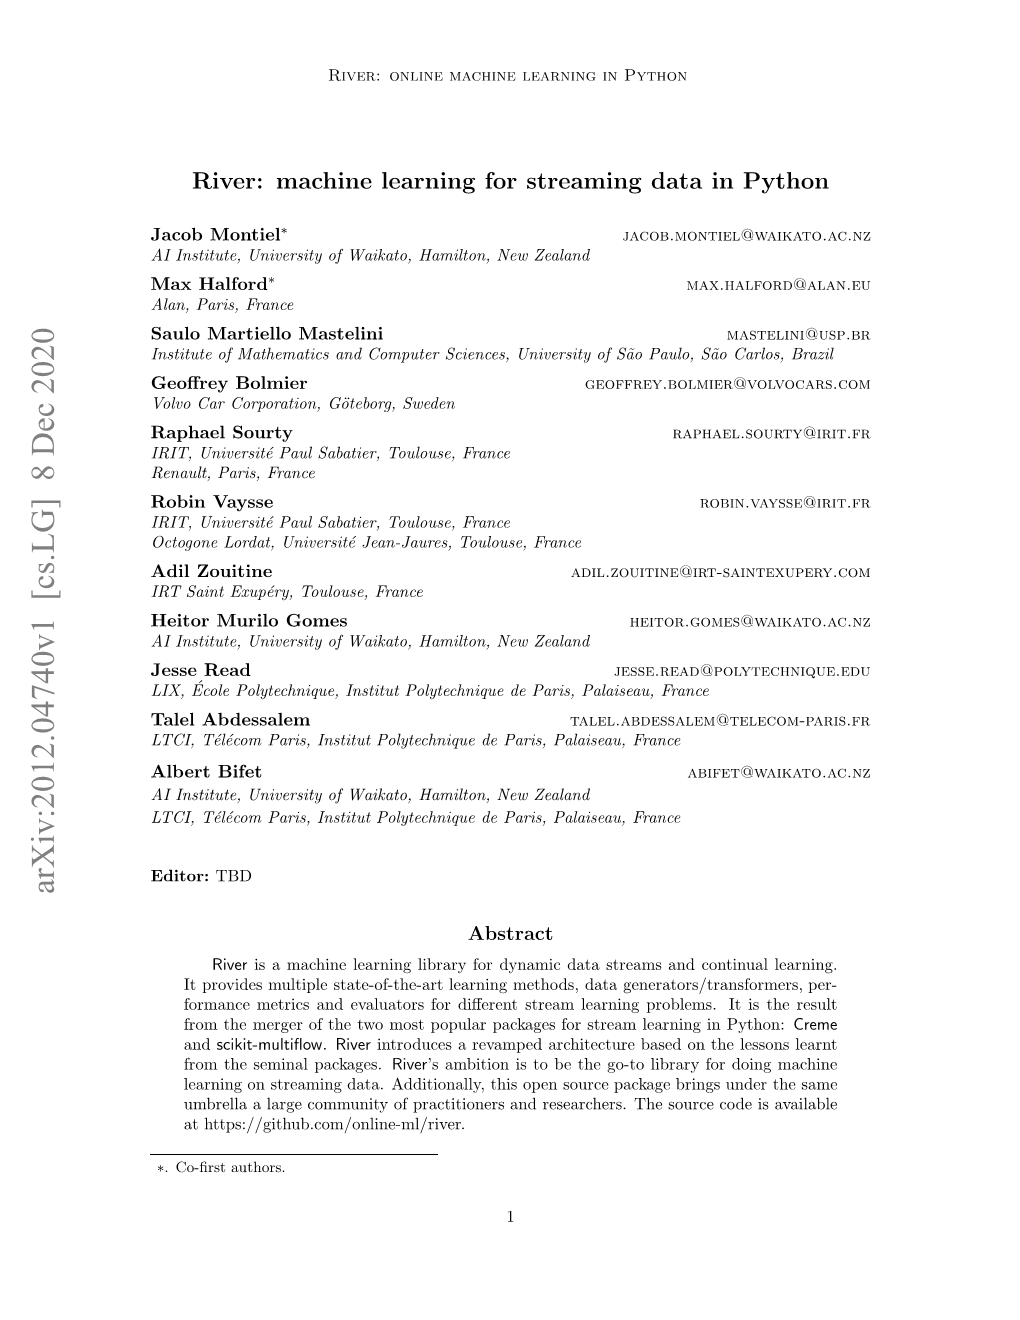 River: Machine Learning for Streaming Data in Python